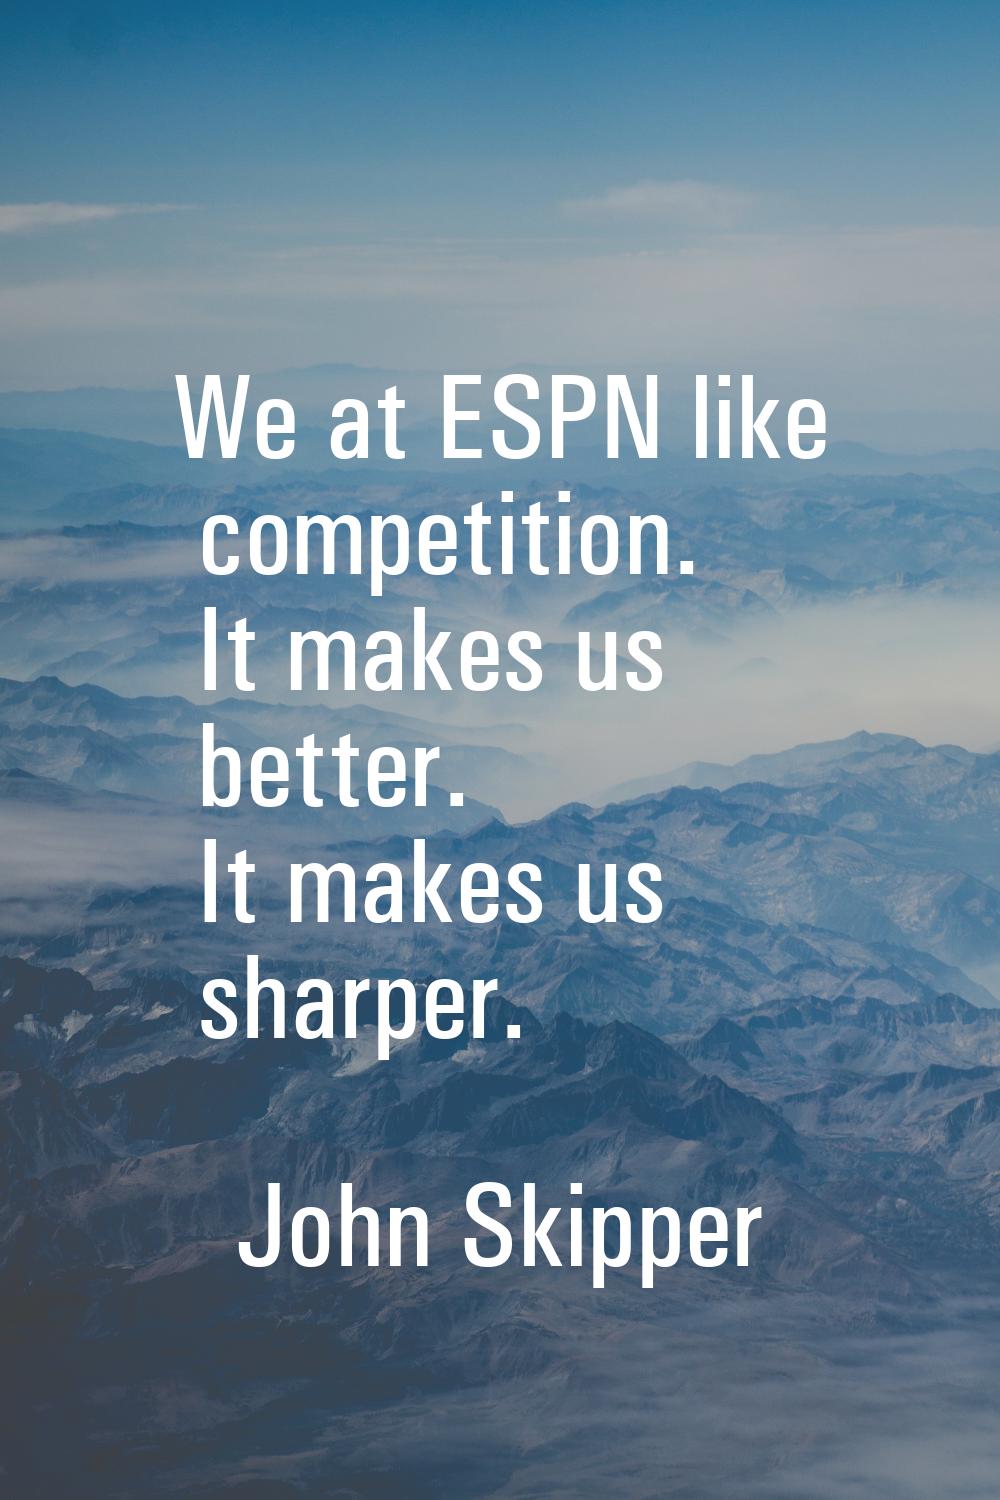 We at ESPN like competition. It makes us better. It makes us sharper.